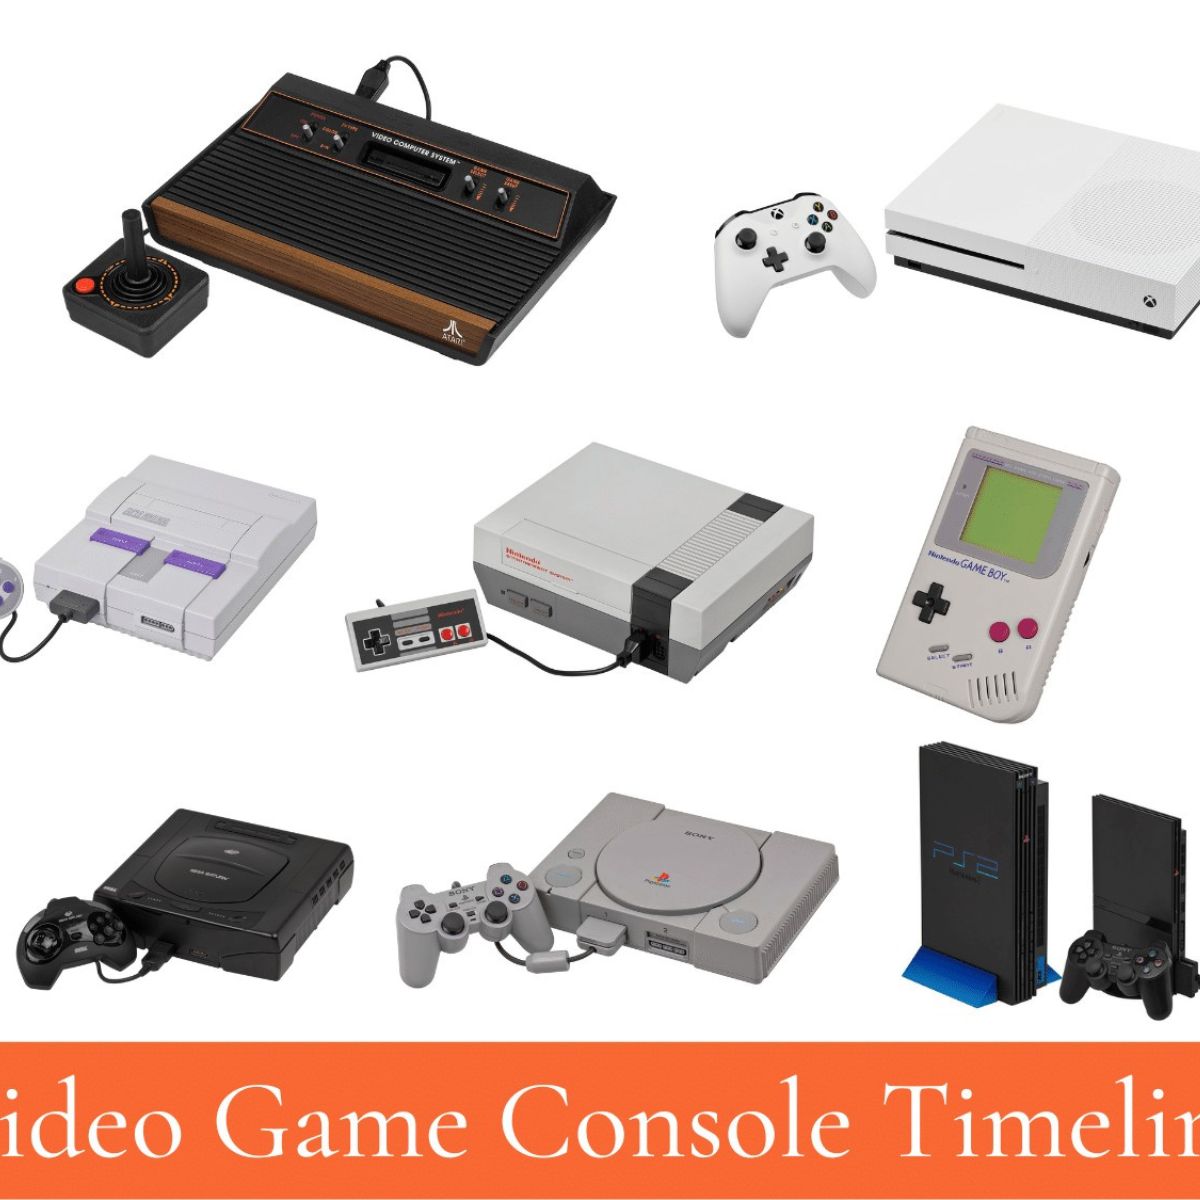 Fifth generation of video game consoles - Wikipedia